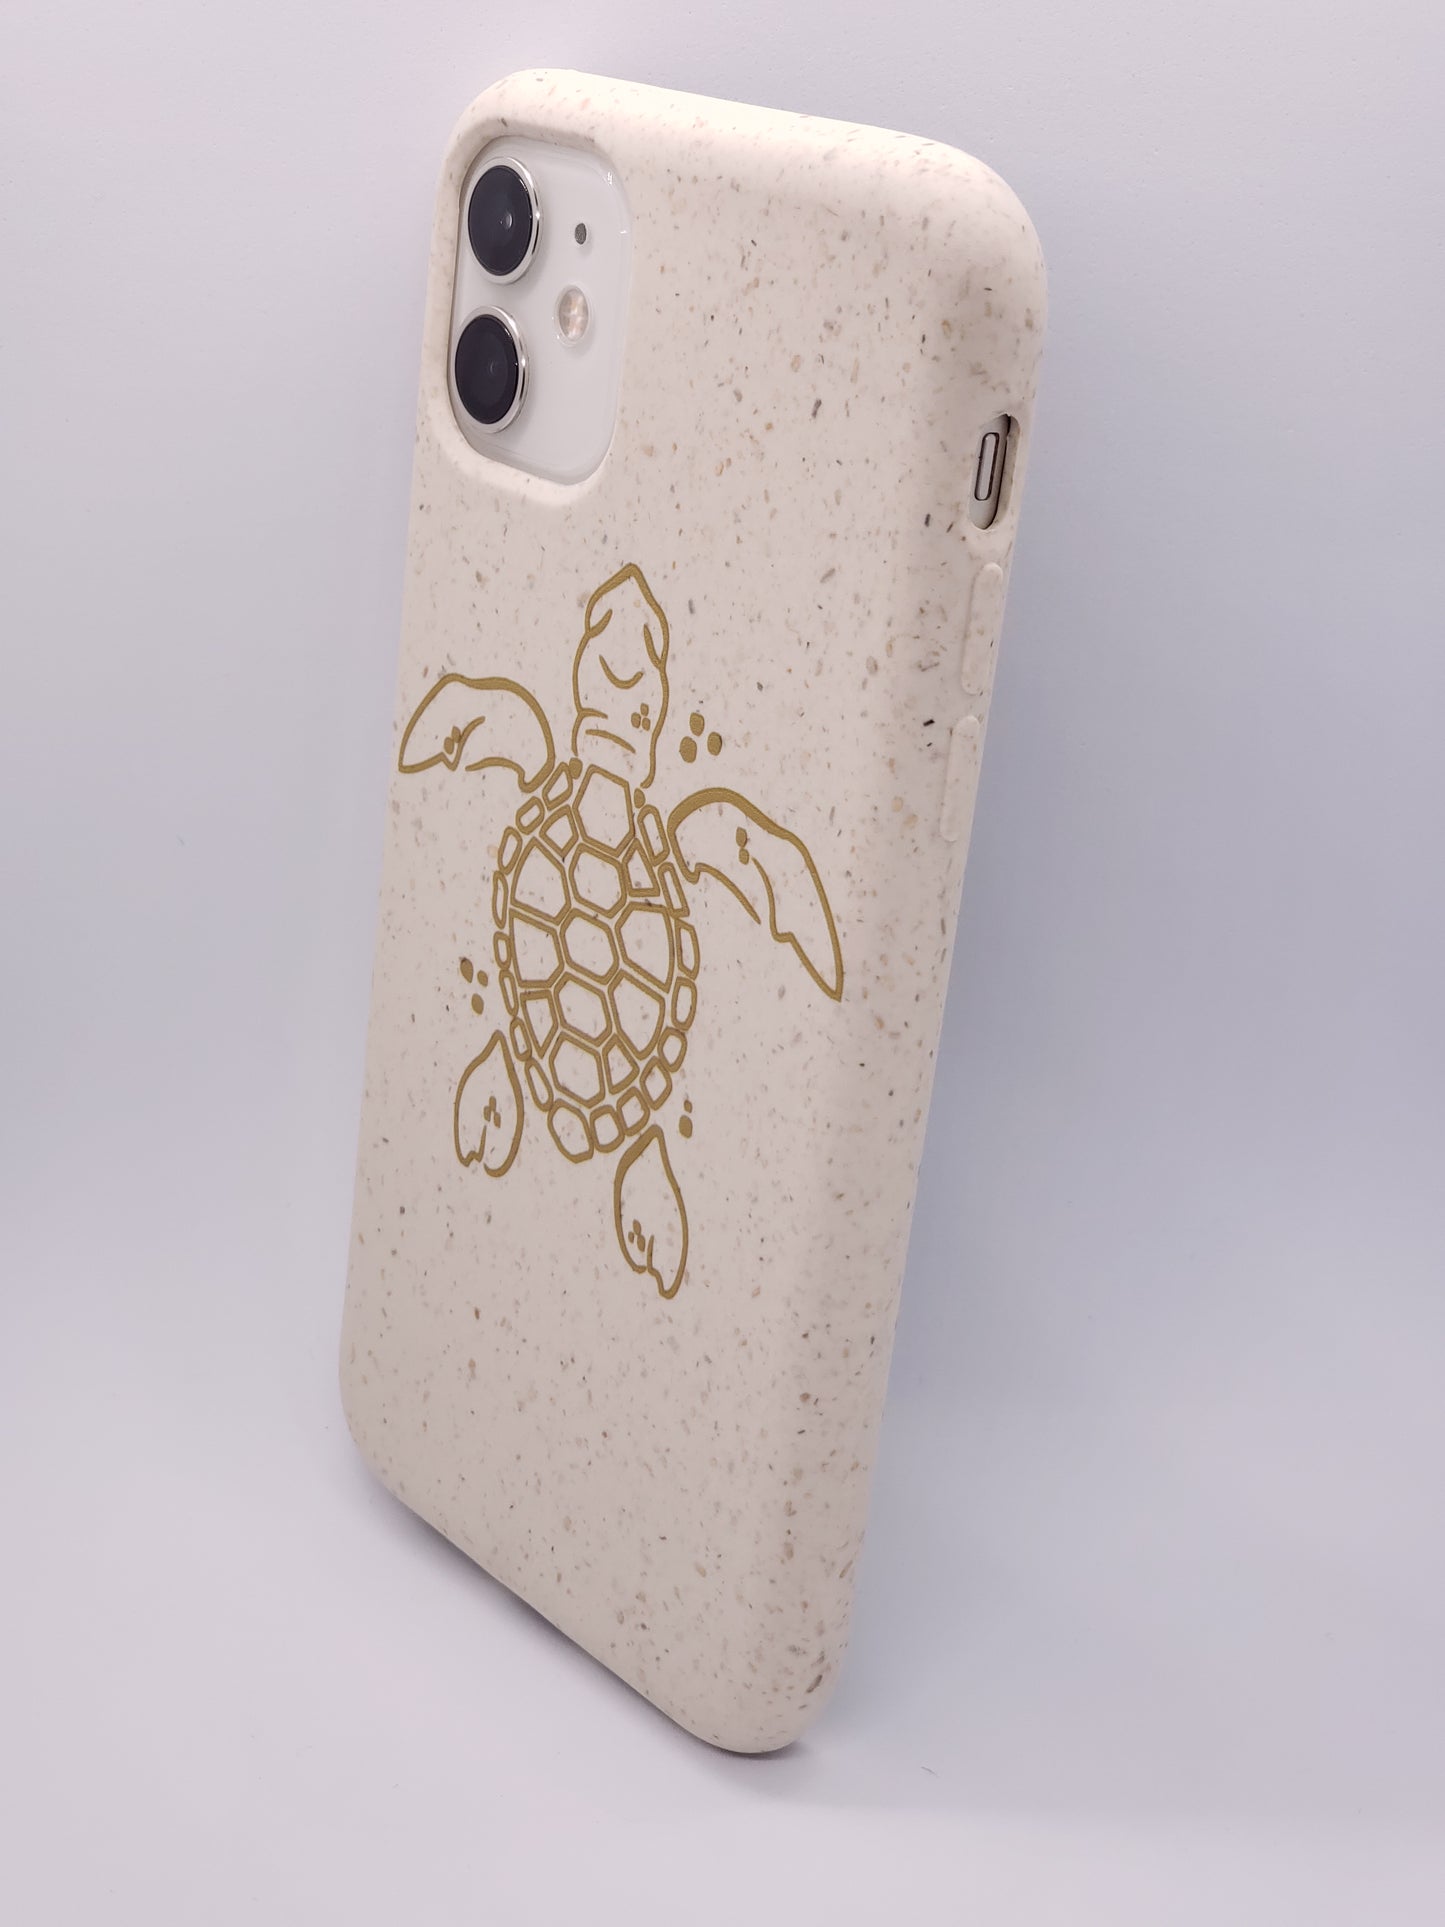 Ocean Turtle Biodegradable Compostable iPhone Case